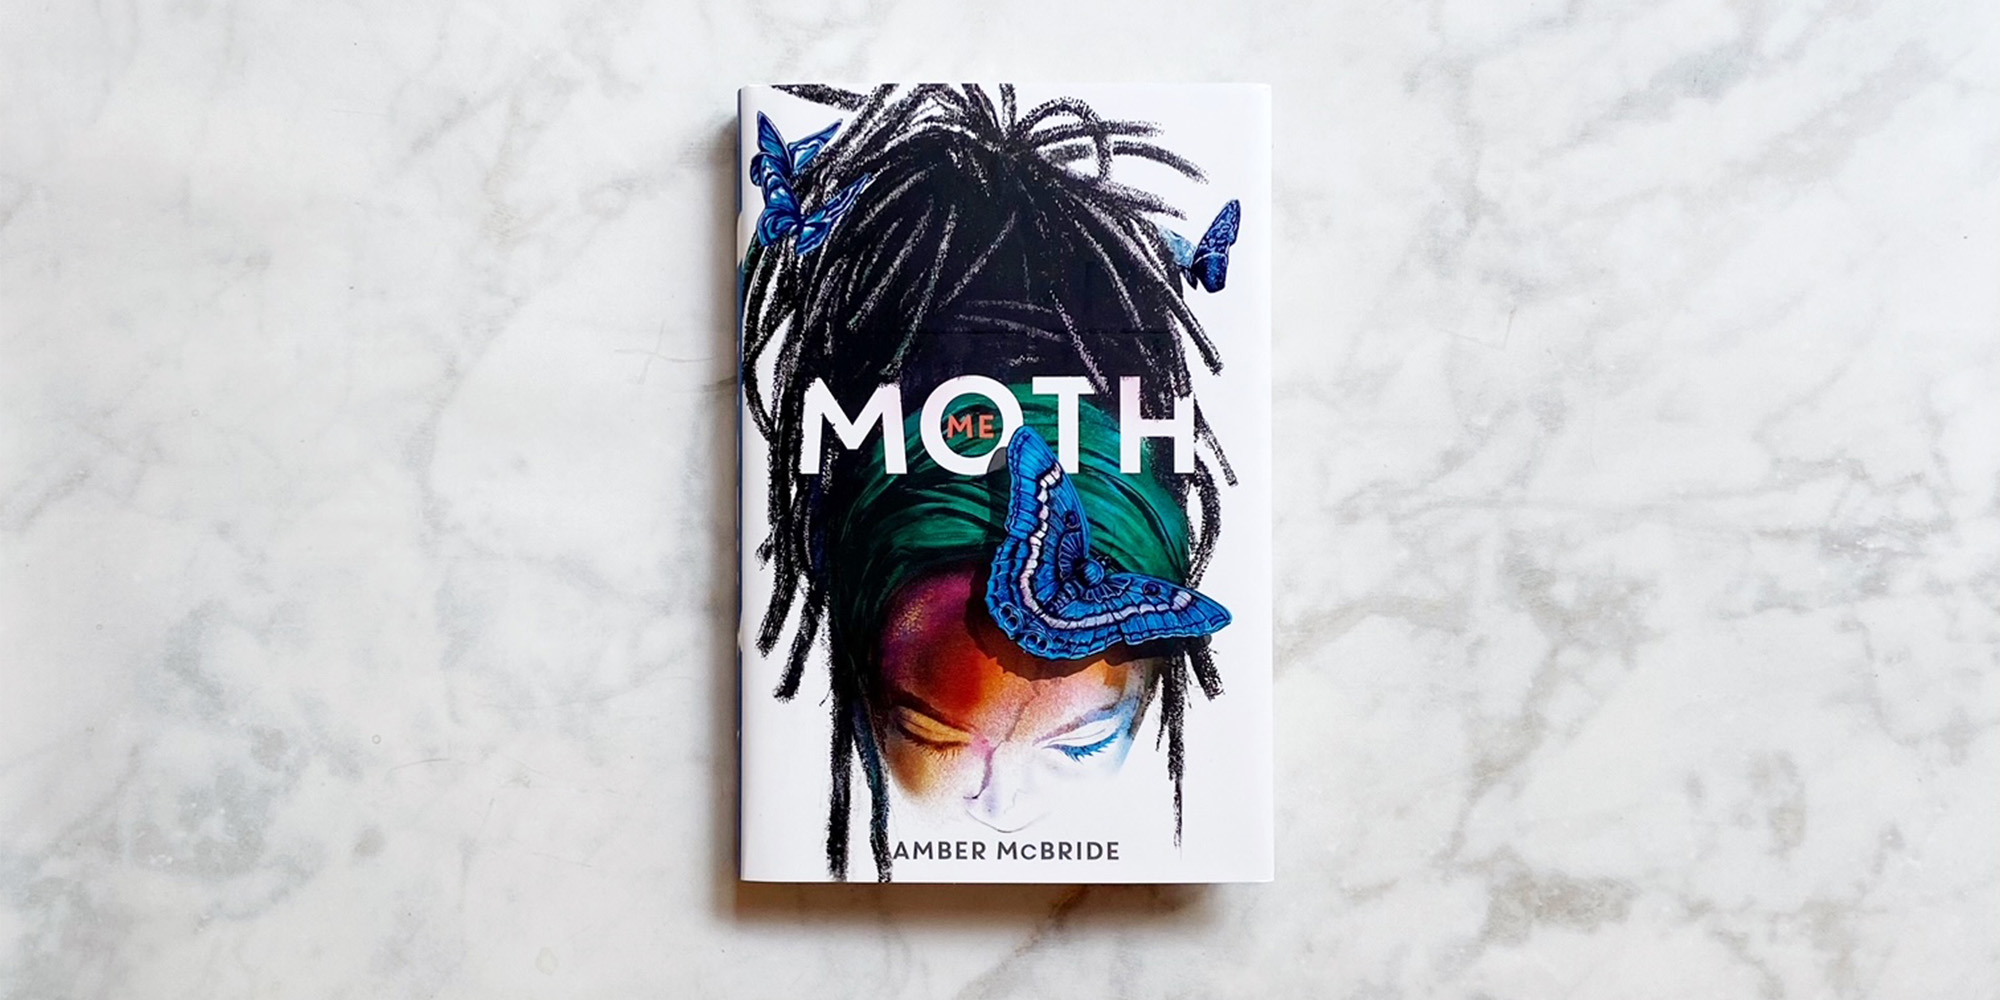 An Interview with Amber McBride, Author of Me (Moth)